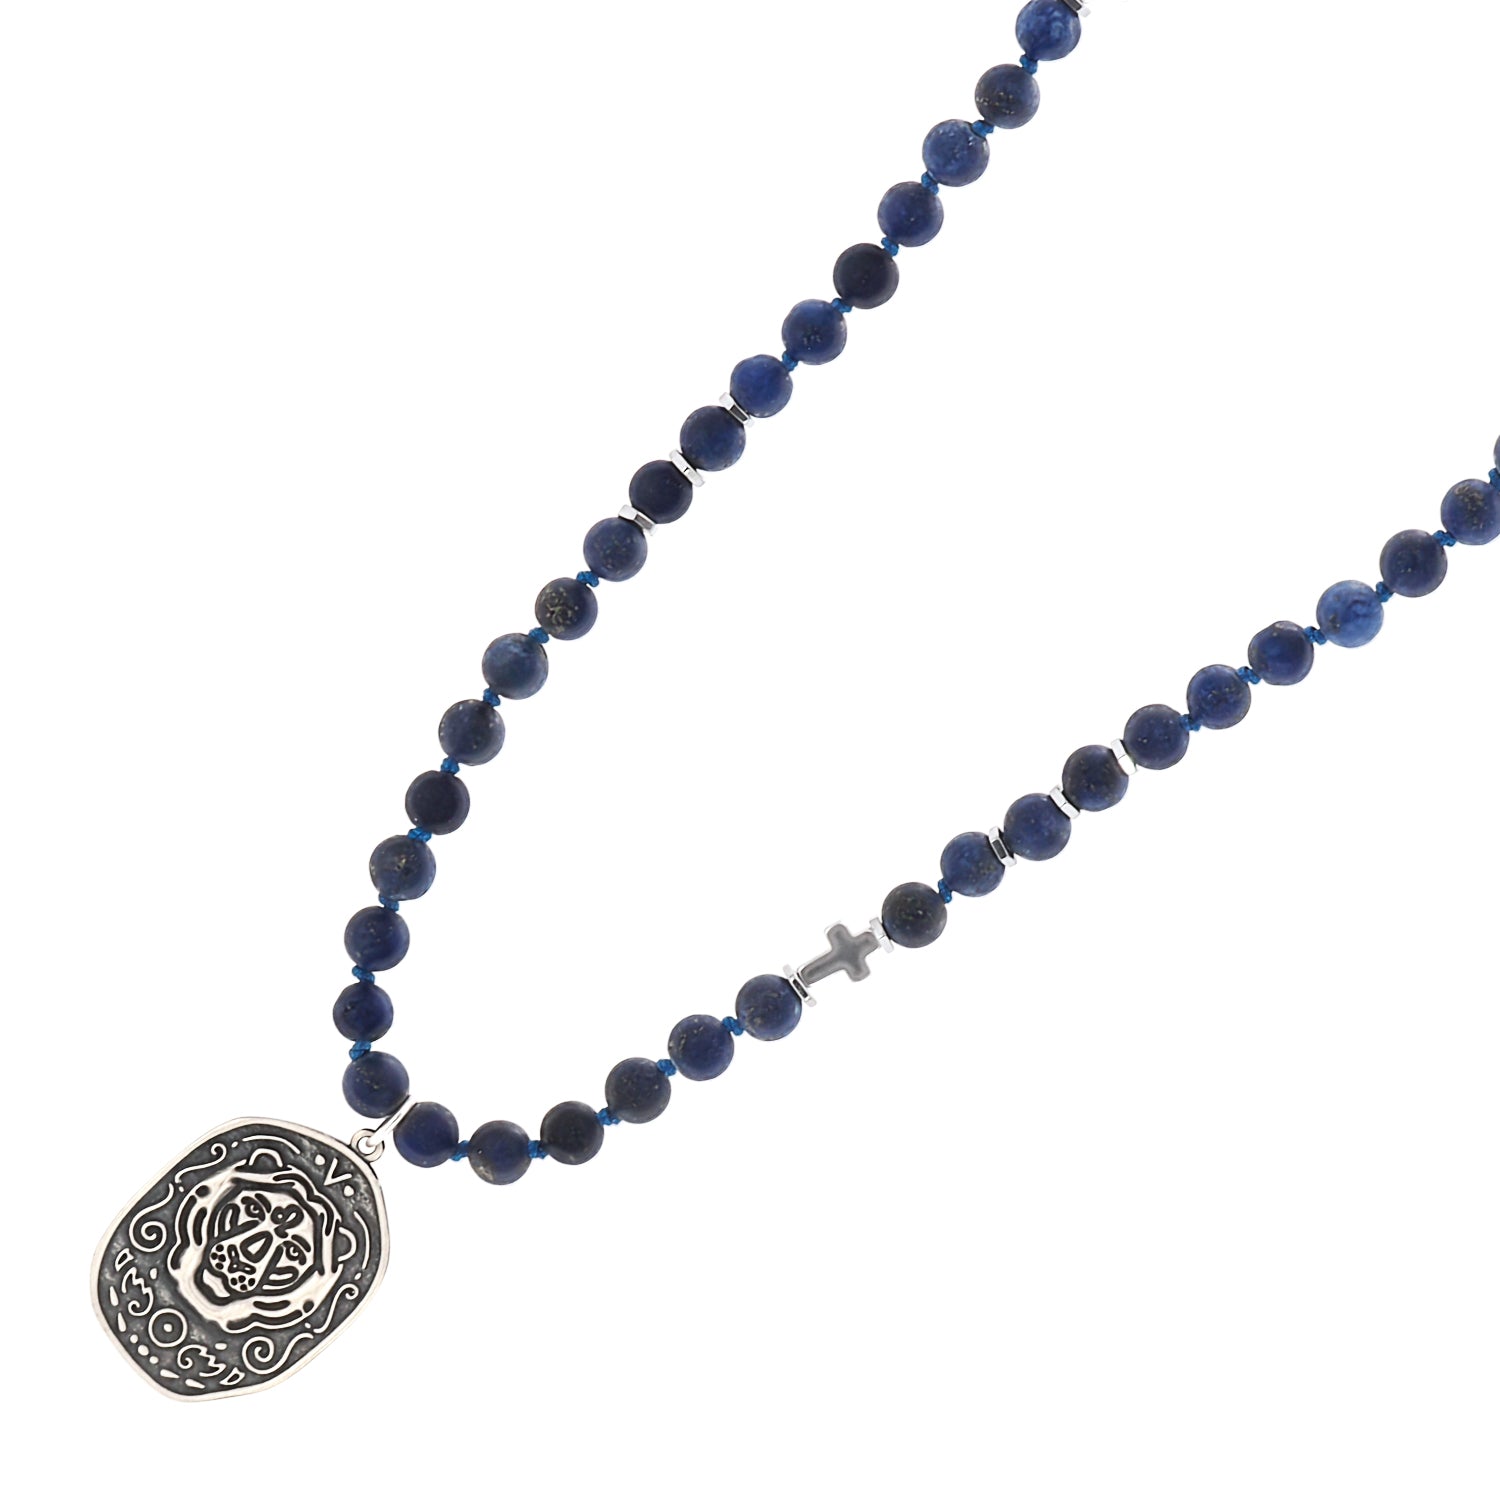 Immerse yourself in the beauty of the Spiritual Lapis Lazuli Lion necklace, combining natural lapis lazuli beads and a sterling silver lion pendant.